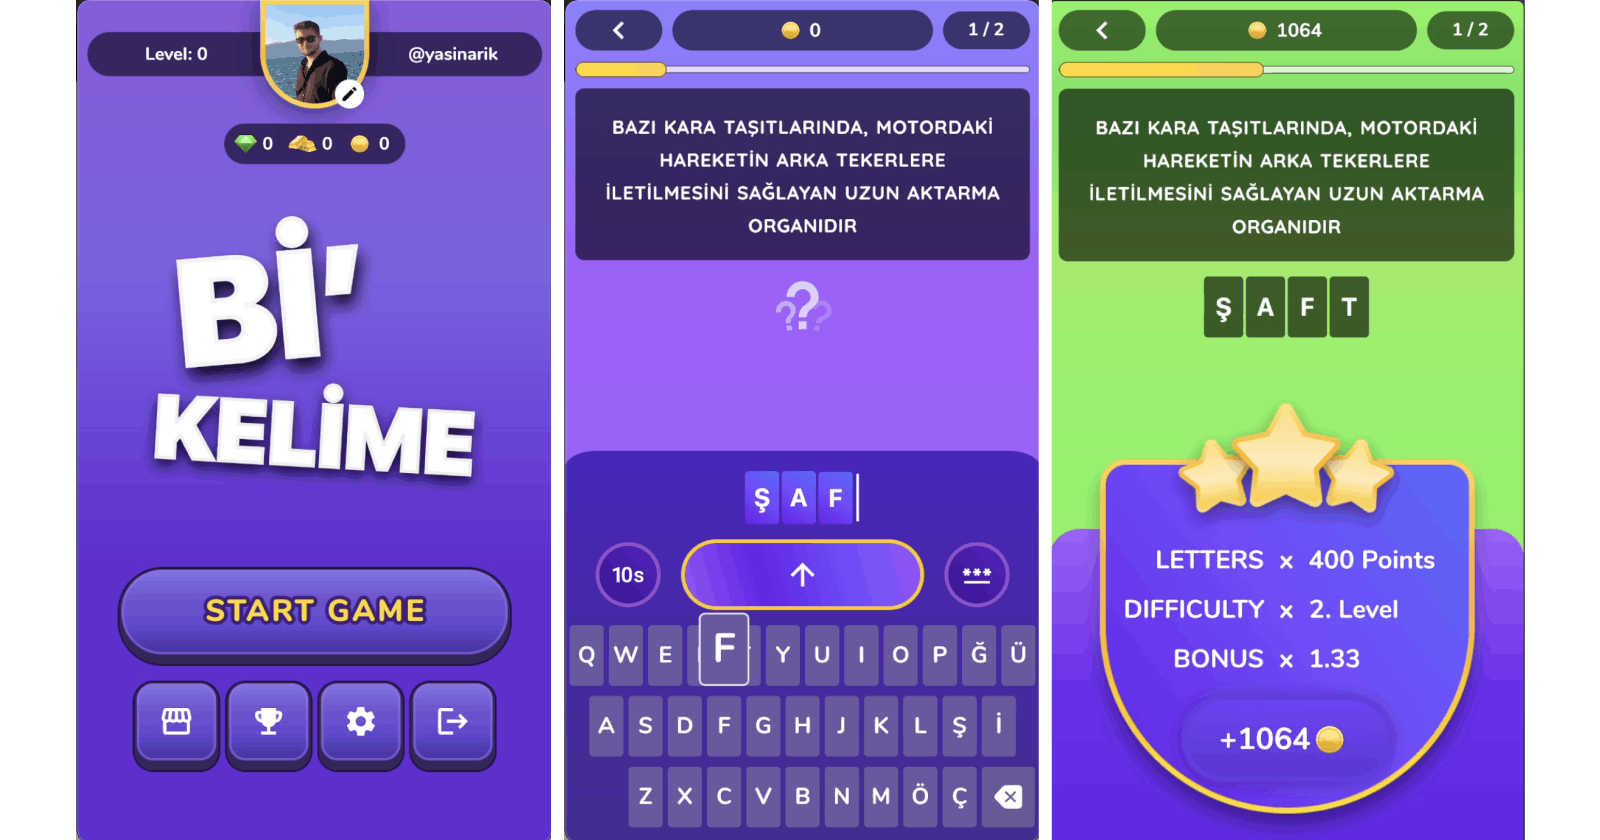 Bi Kelime (A Word): A Trivia-Word Guessing Game built with Flutter.